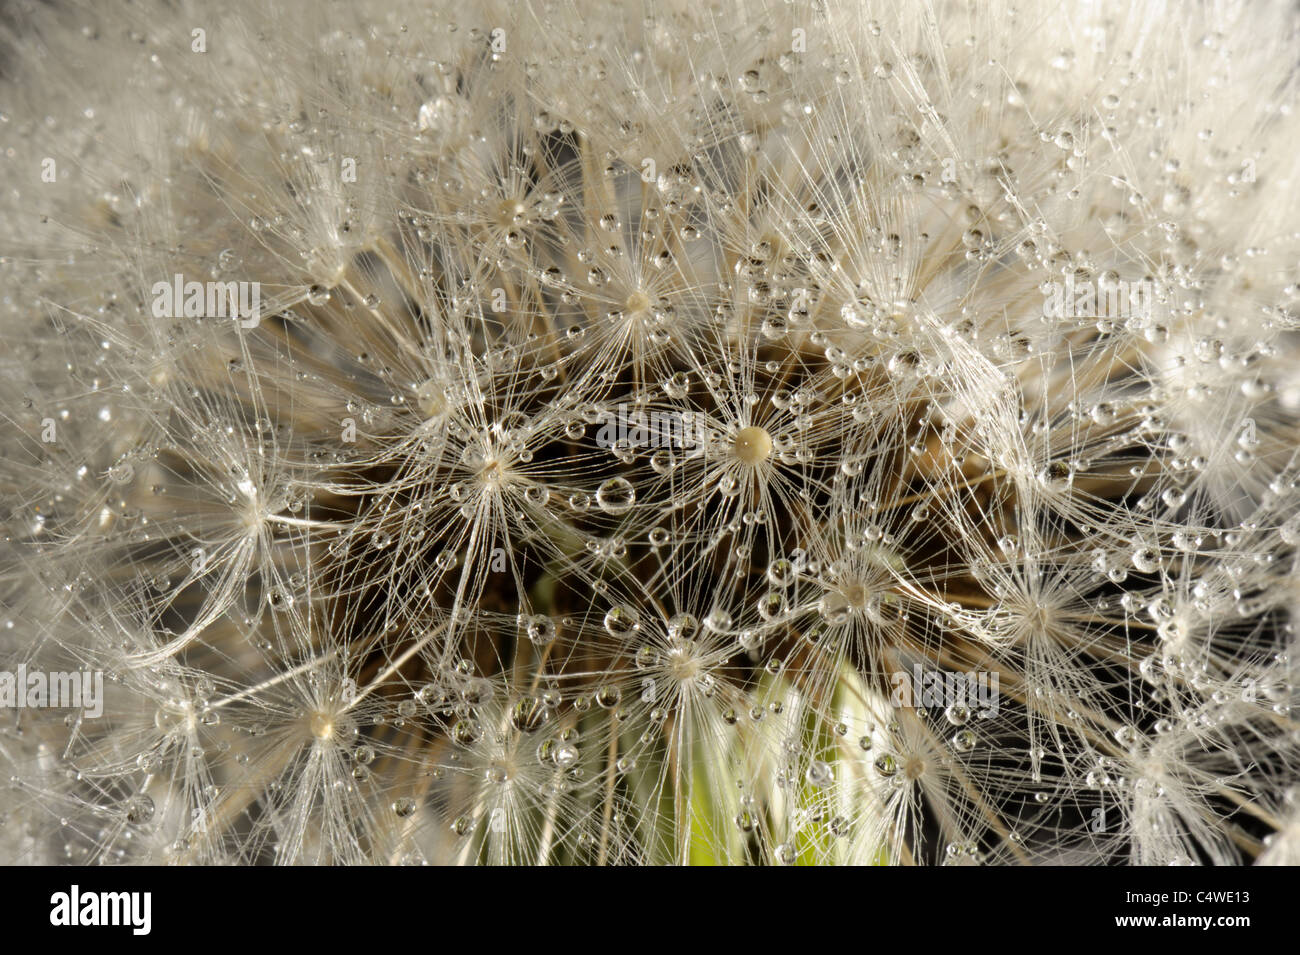 Parachutes or pappus of a dandelion (Taraxacum officinale) covered with fine mist droplets Stock Photo